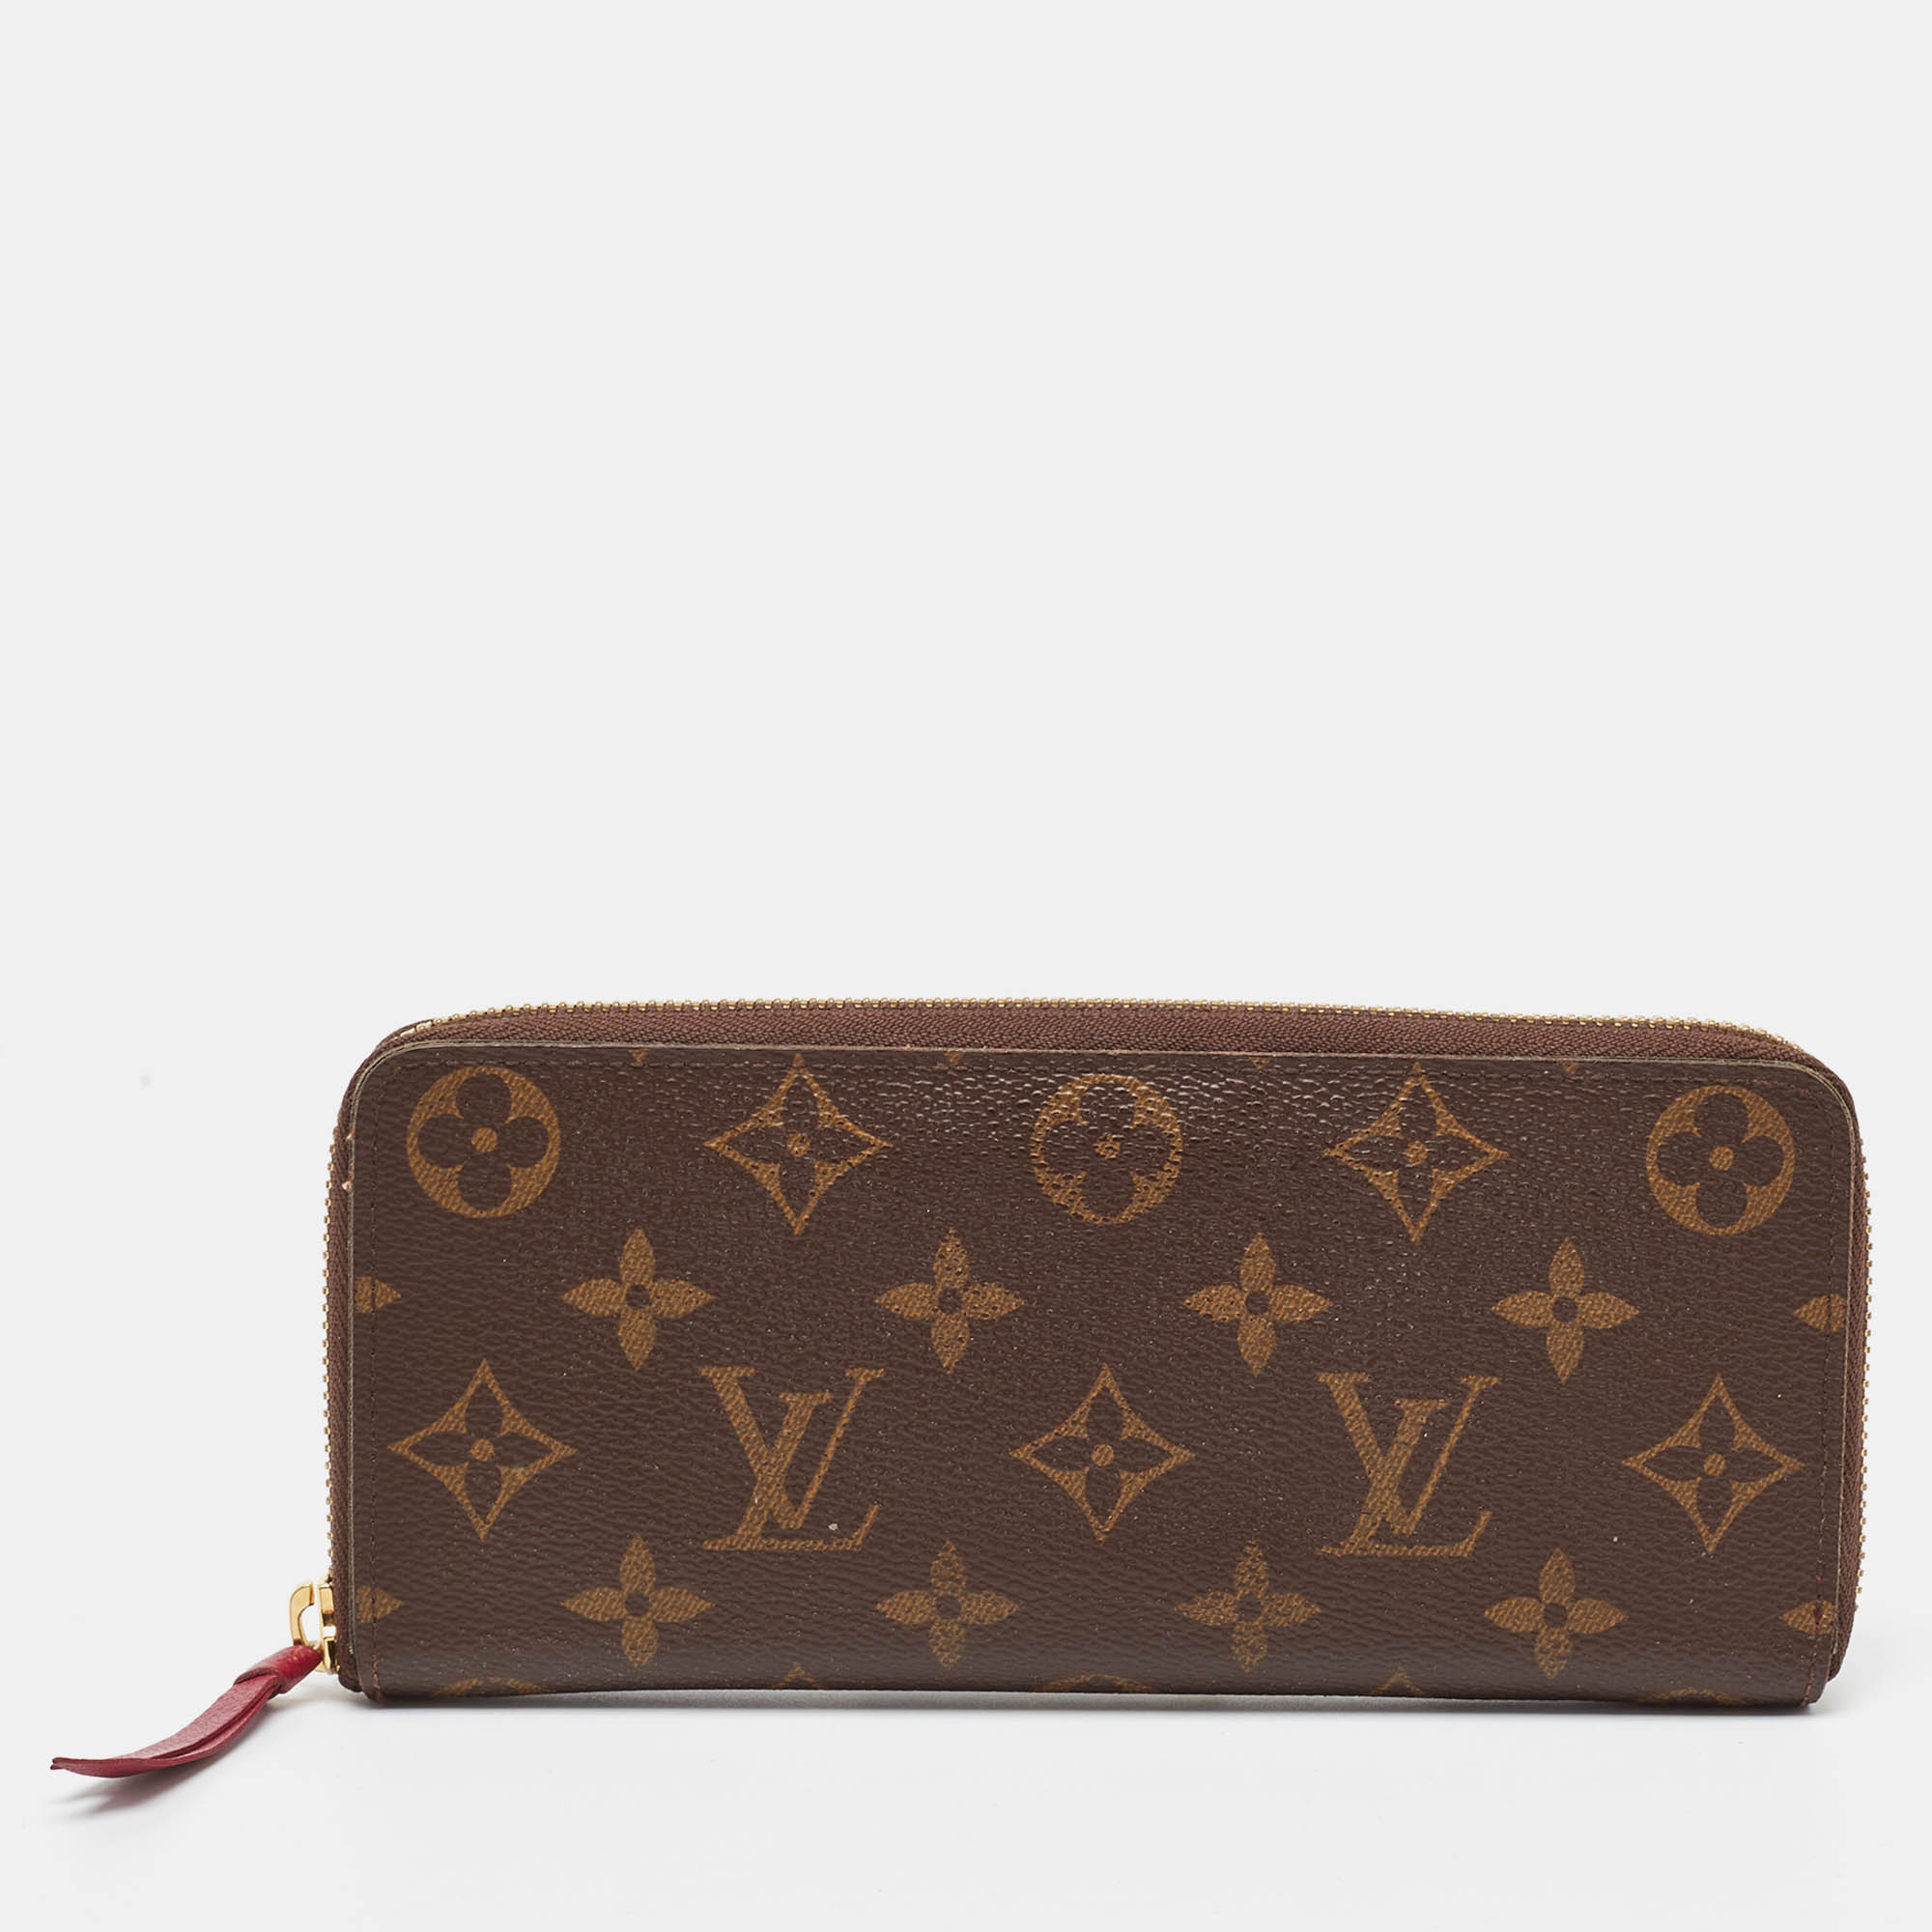 A wallet should not only be good looking but also functional just like this pretty one from Louis Vuitton. Crafted in France this gorgeous piece flaunts the signature Monogram pattern on the coated canvas exterior and the zip around that reveals multiple slots and compartments.